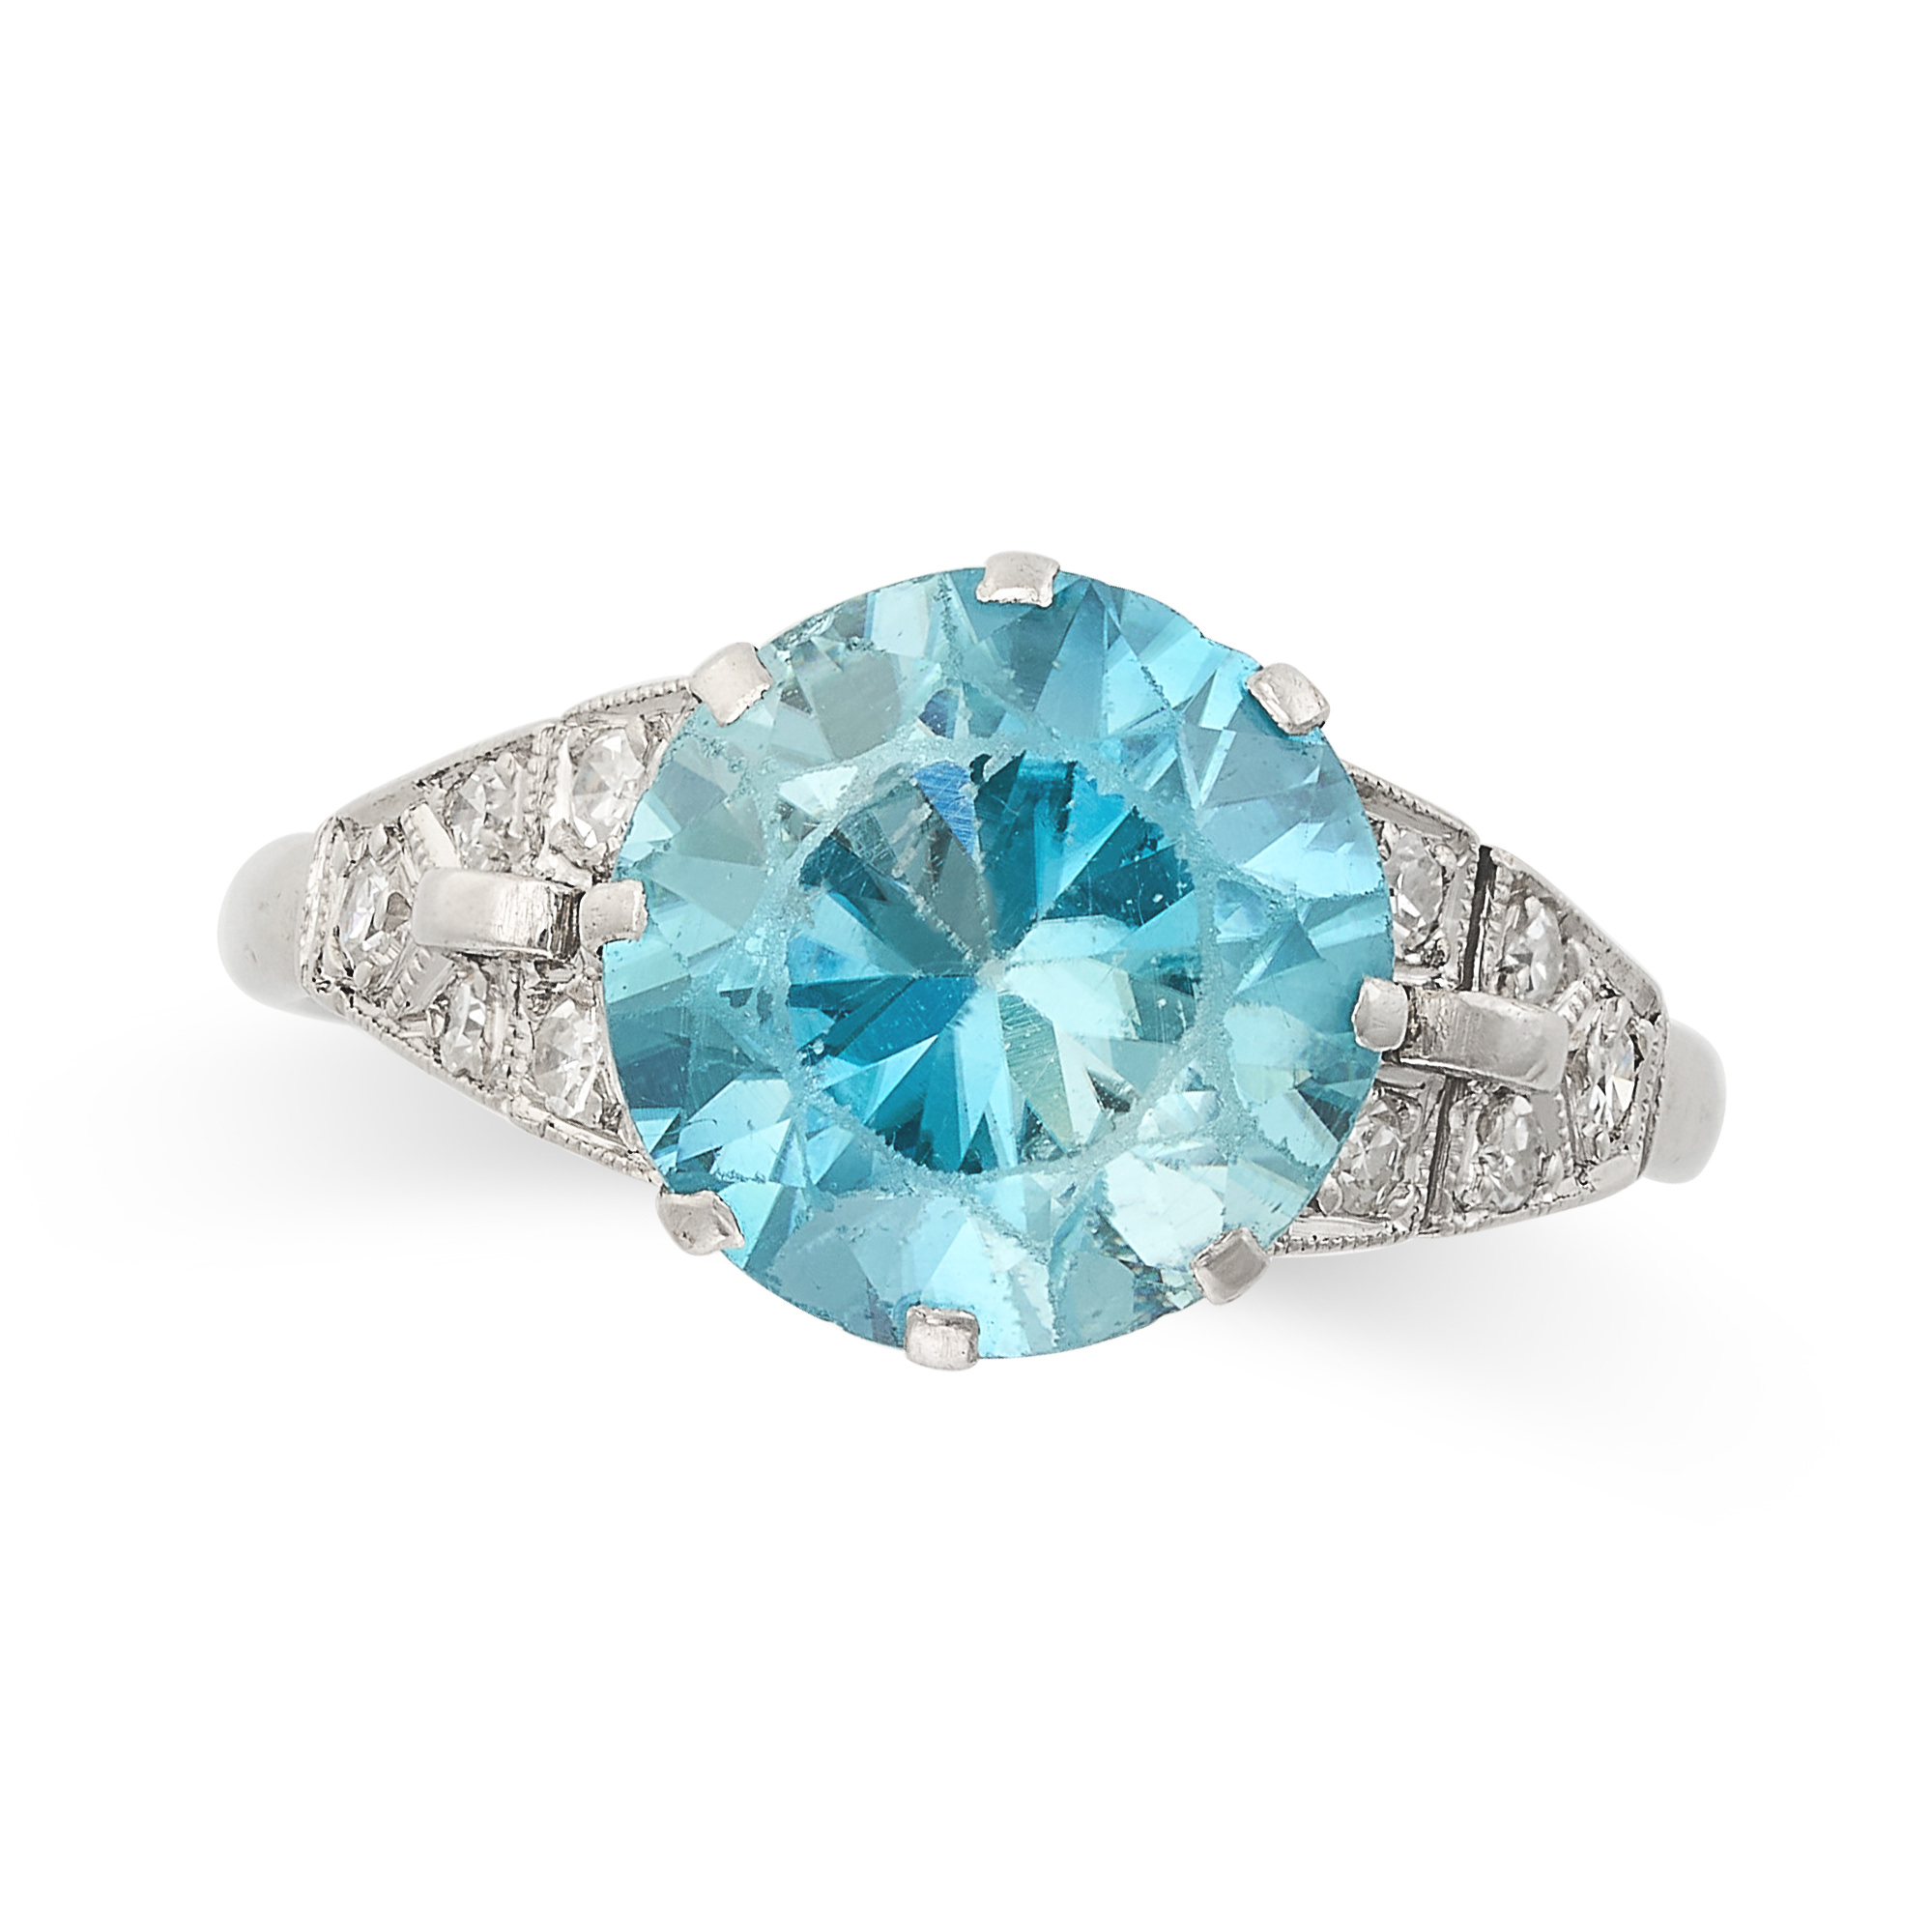 NO RESERVE - AN ART DECO BLUE ZIRCON AND DIAMOND DRESS RING, CIRCA 1930 in platinum, set to the